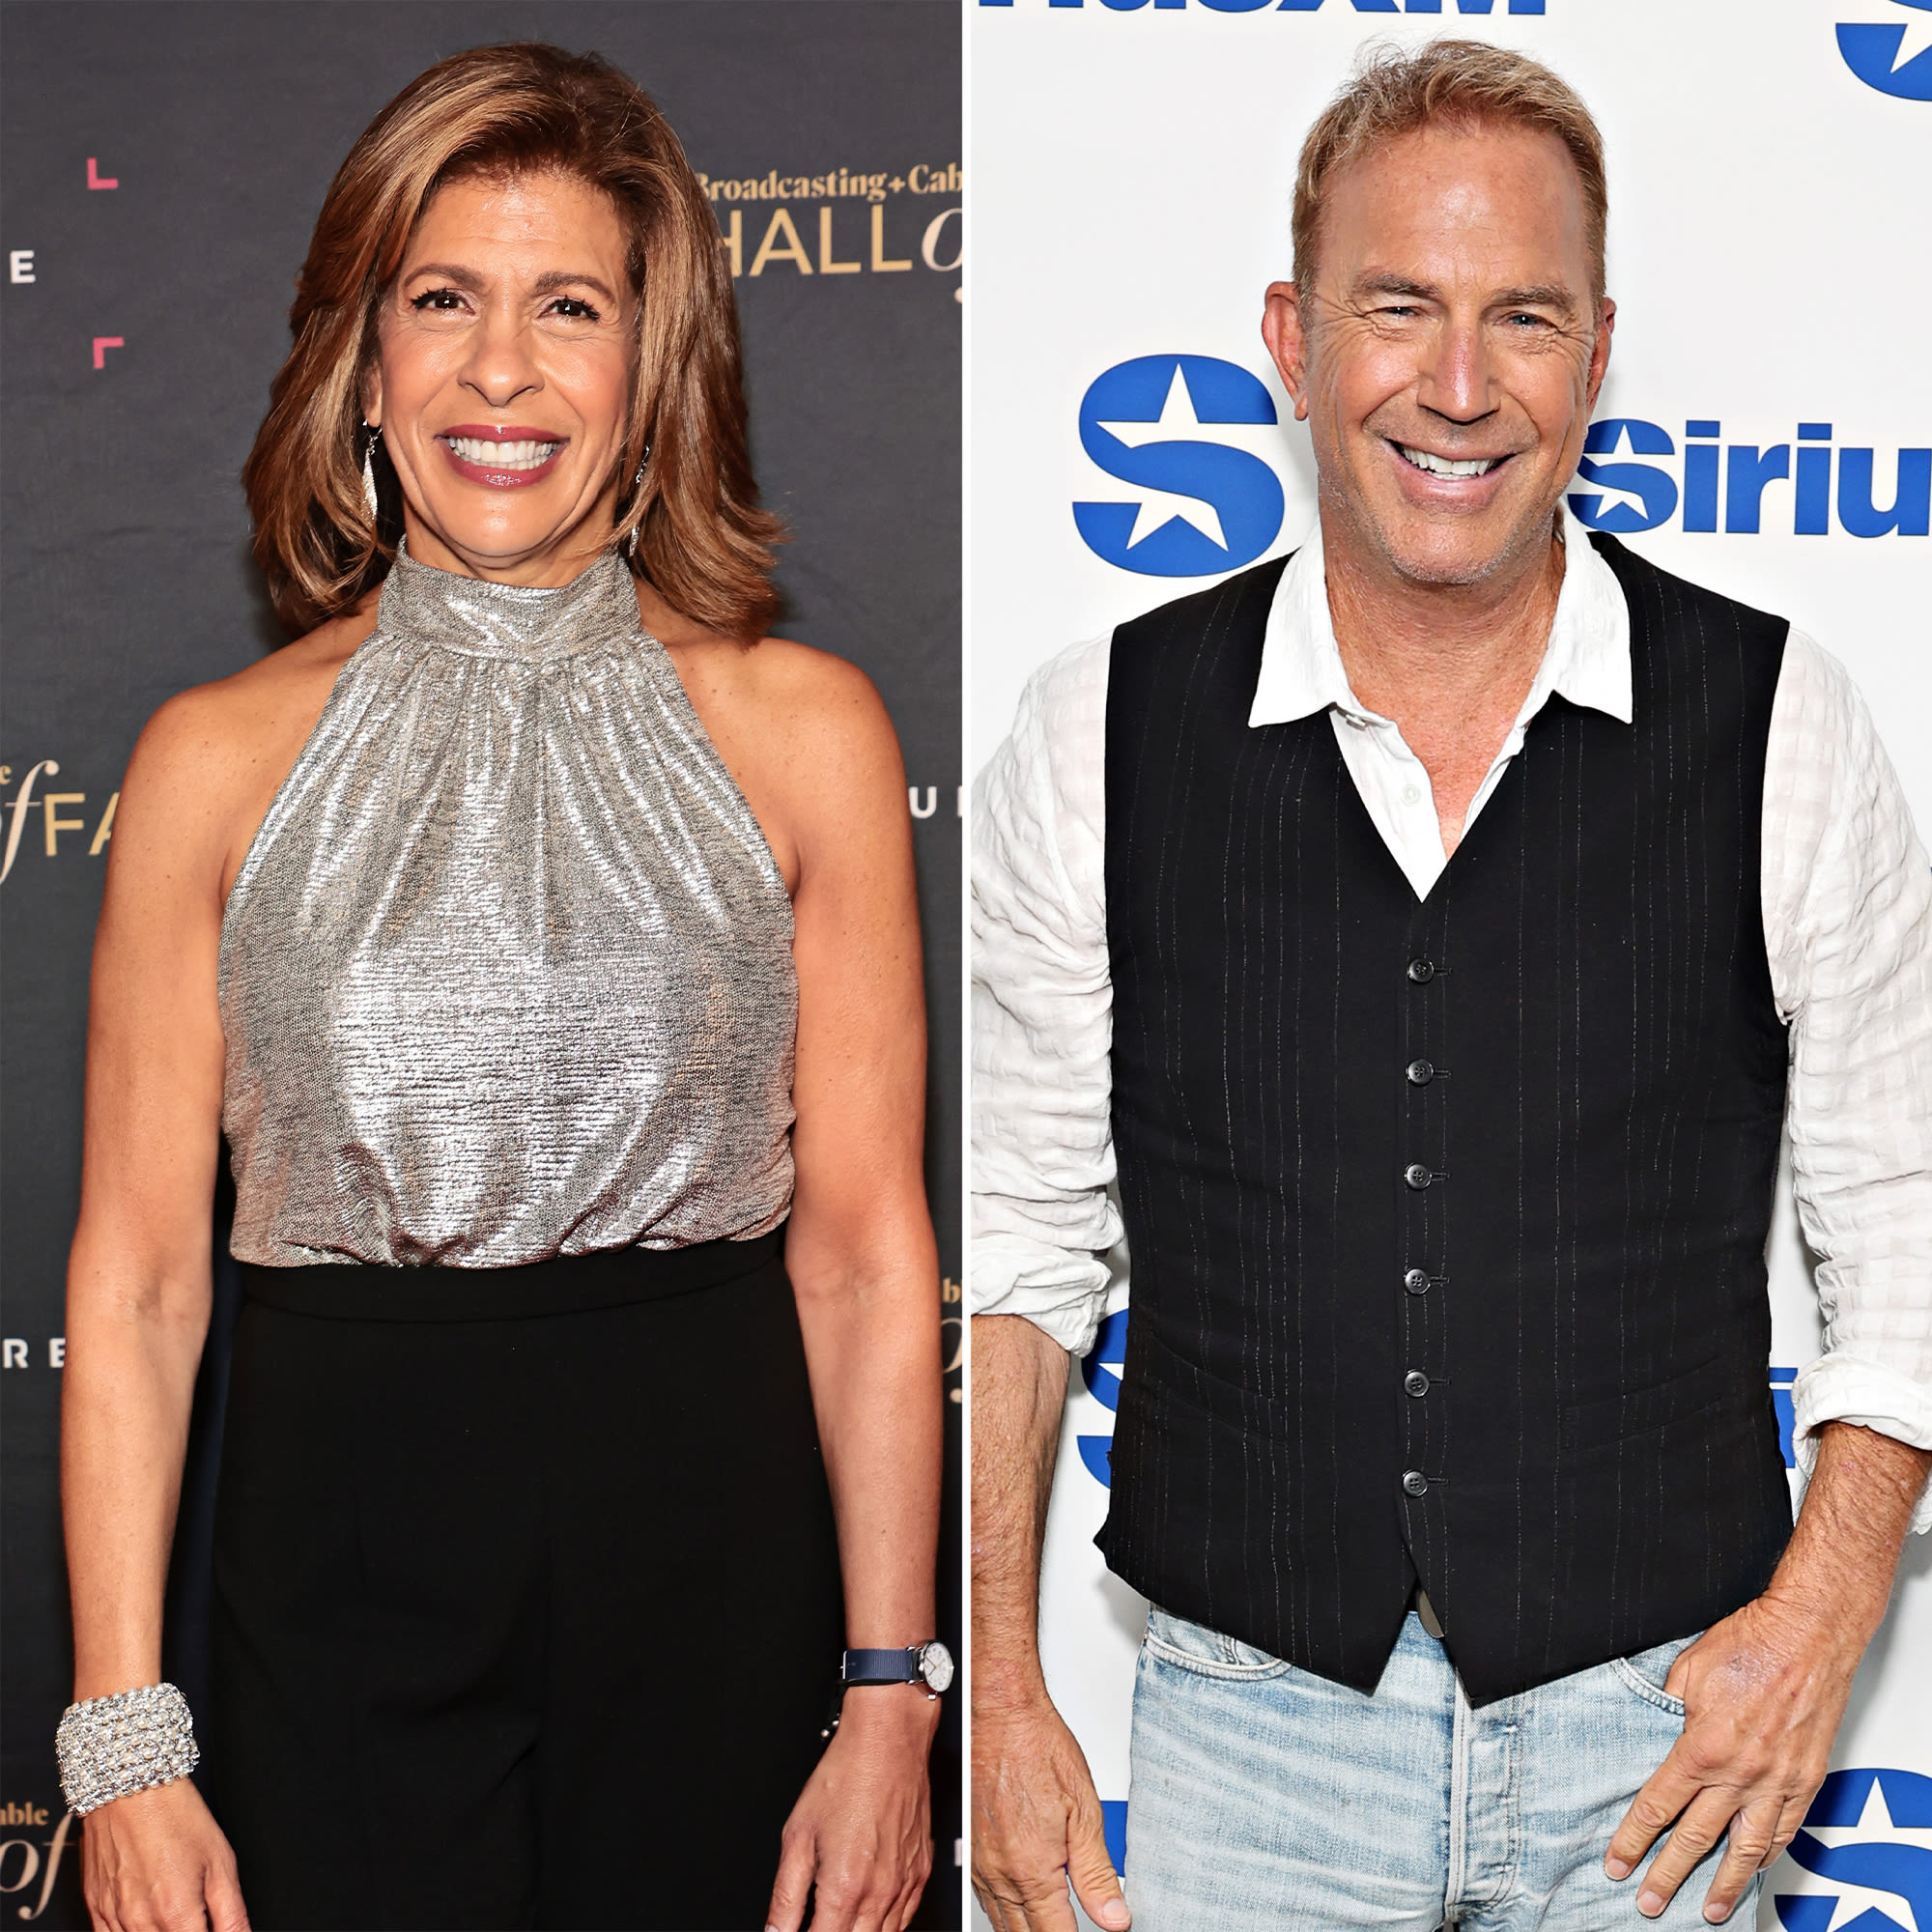 Hoda Kotb Reacts to People Shipping Her and Kevin Costner After ‘Today’ Interview: ‘Unbelievable’